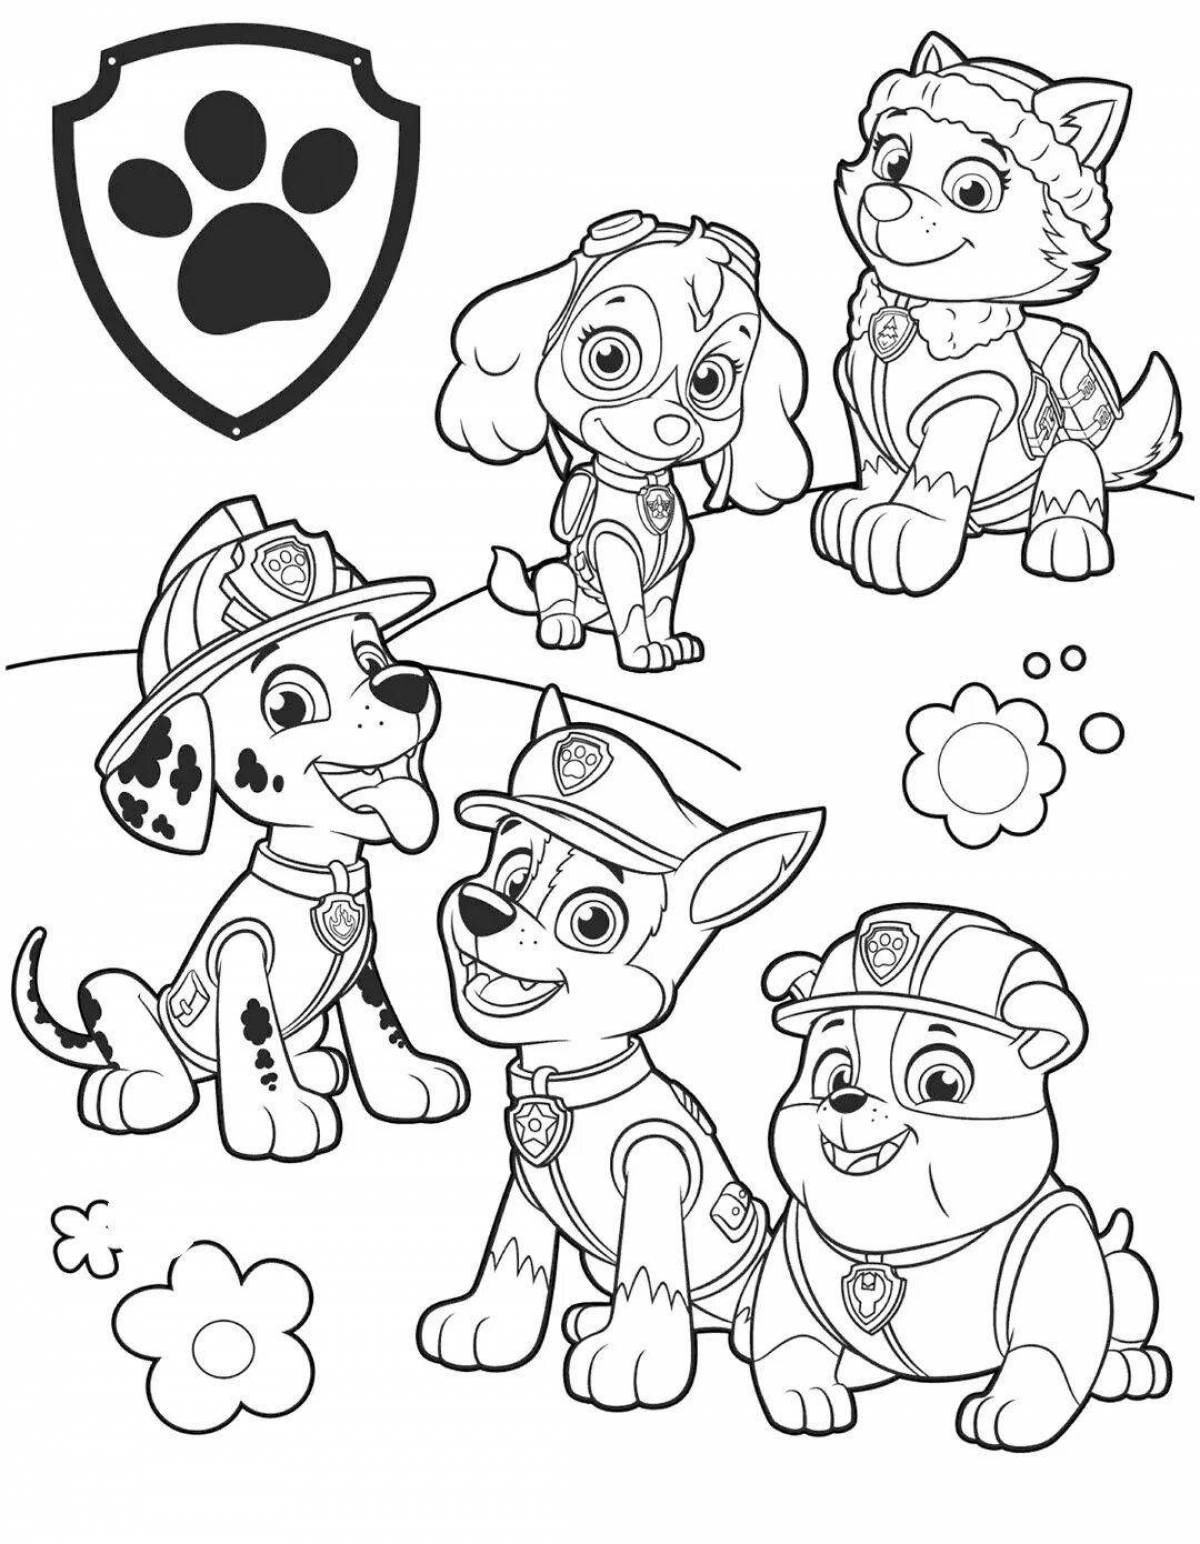 Funny paw patrol coloring book